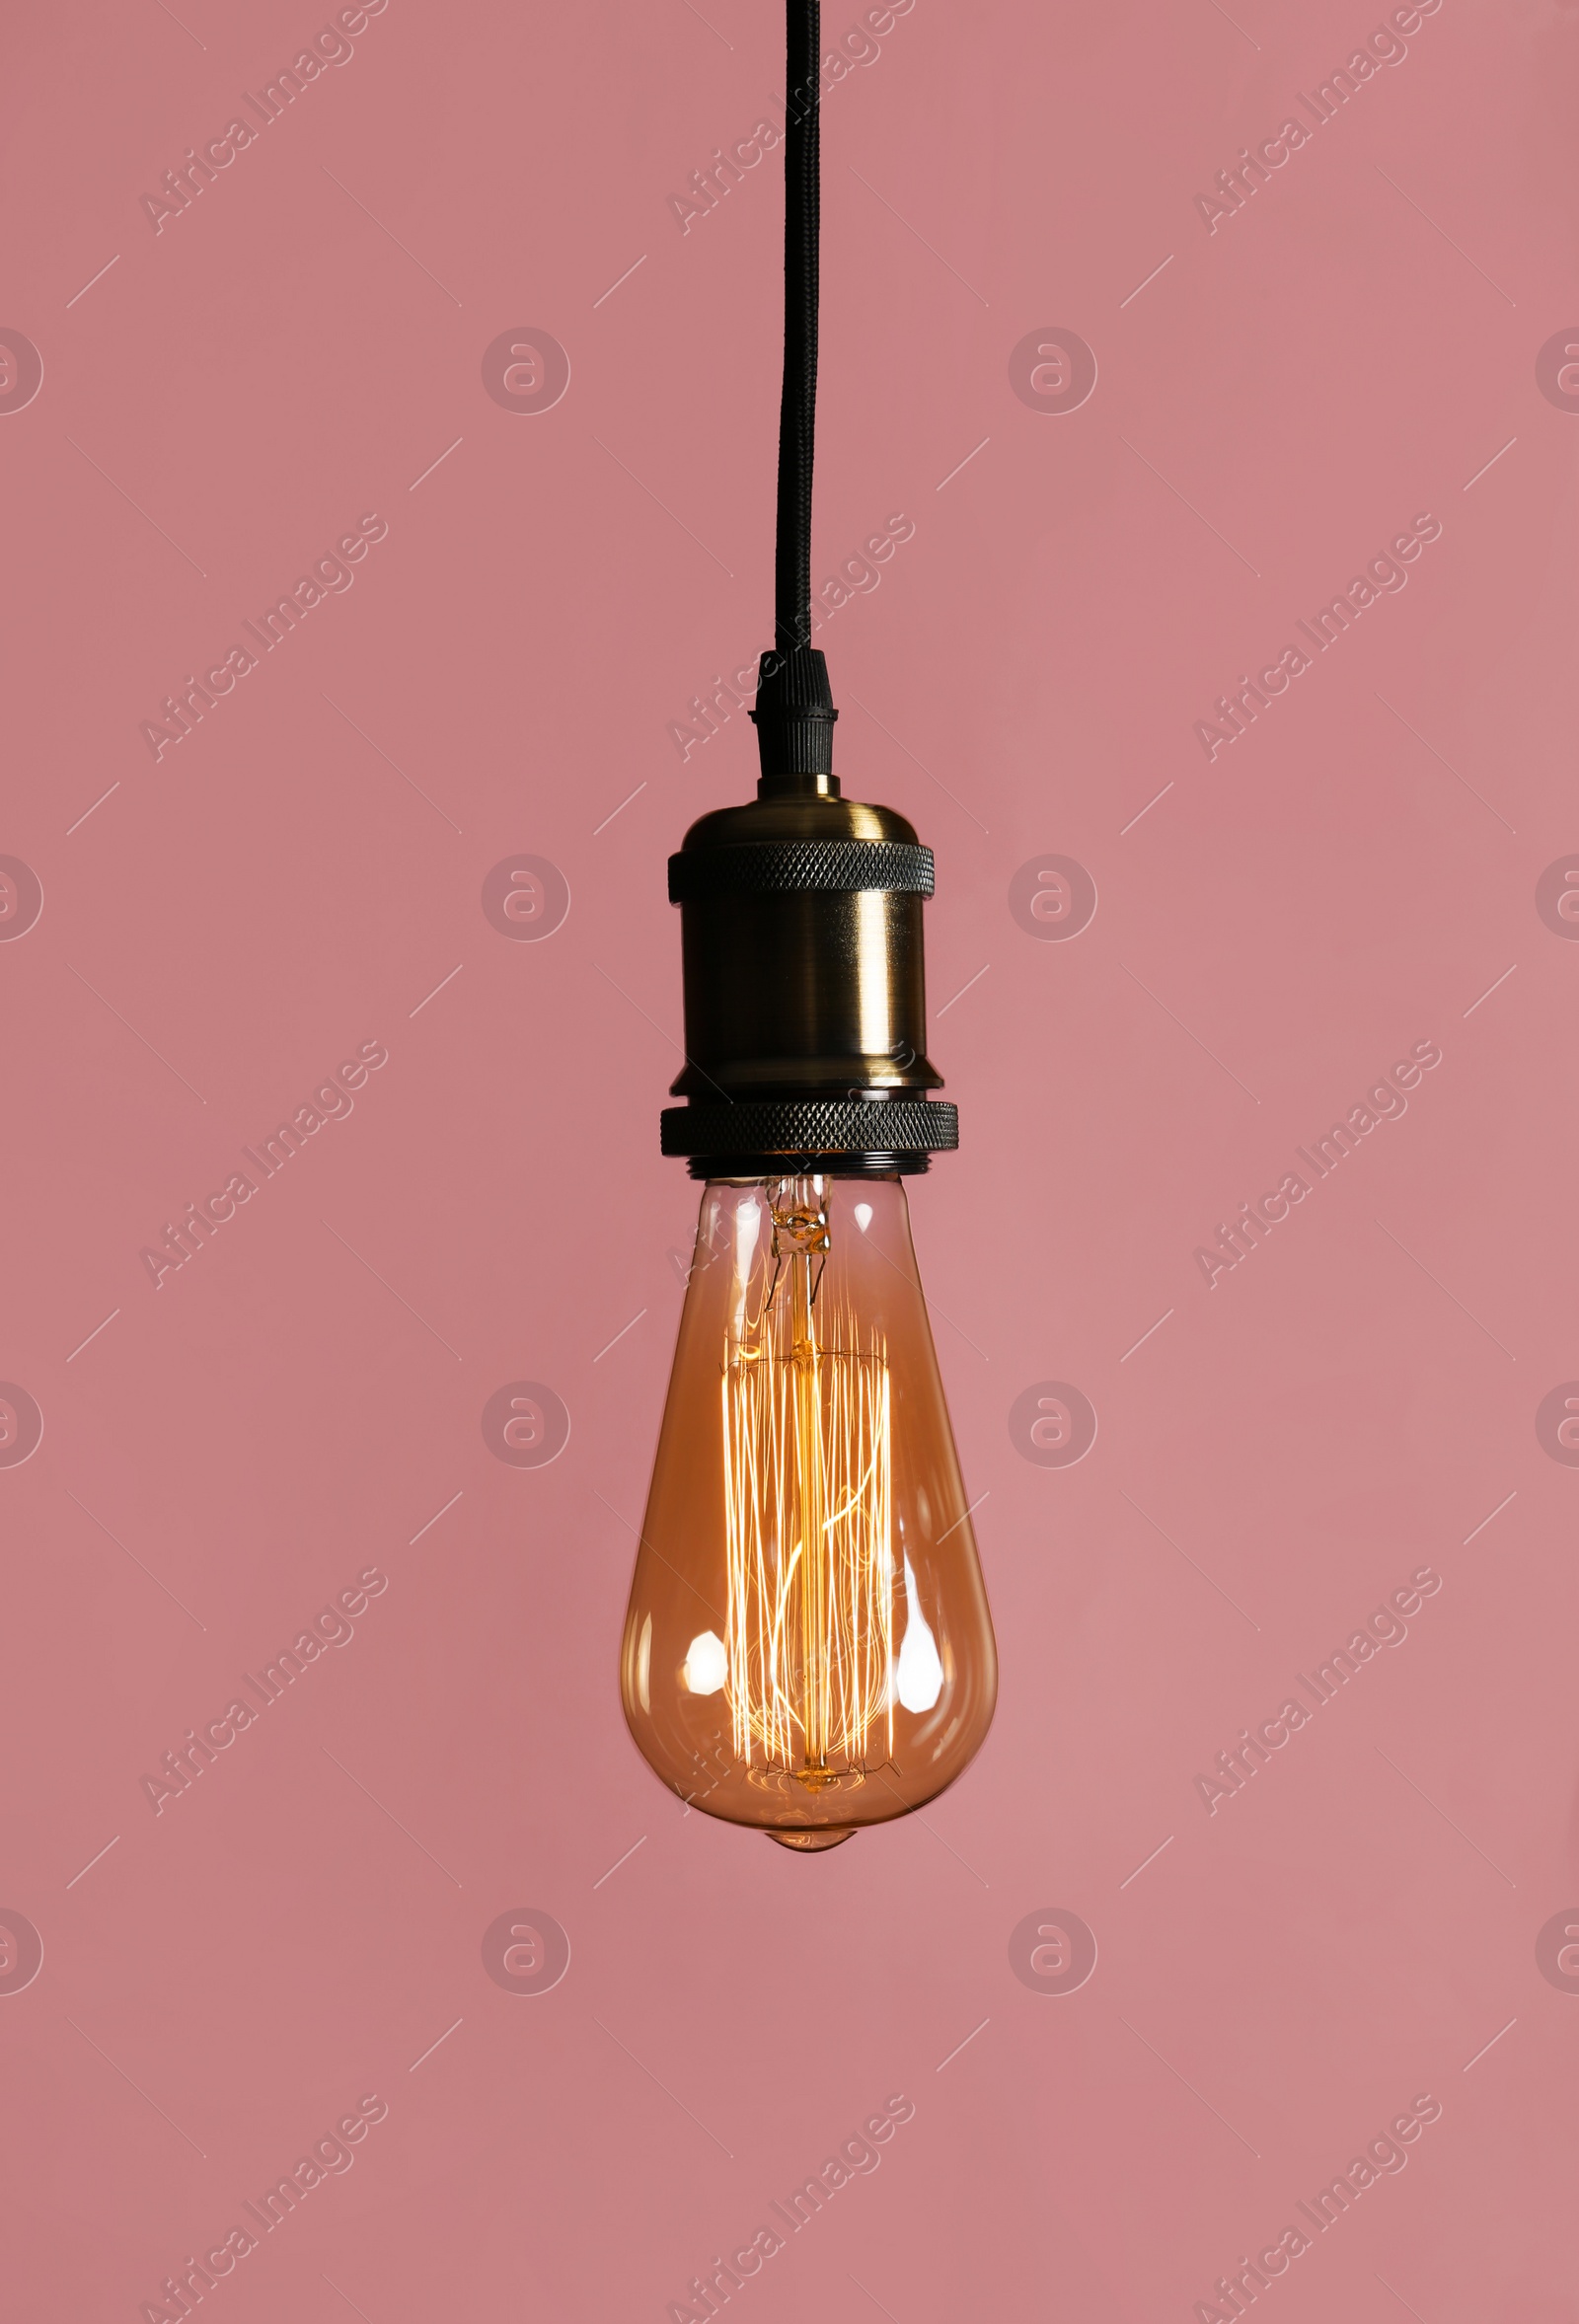 Photo of Hanging modern lamp bulb against pink background